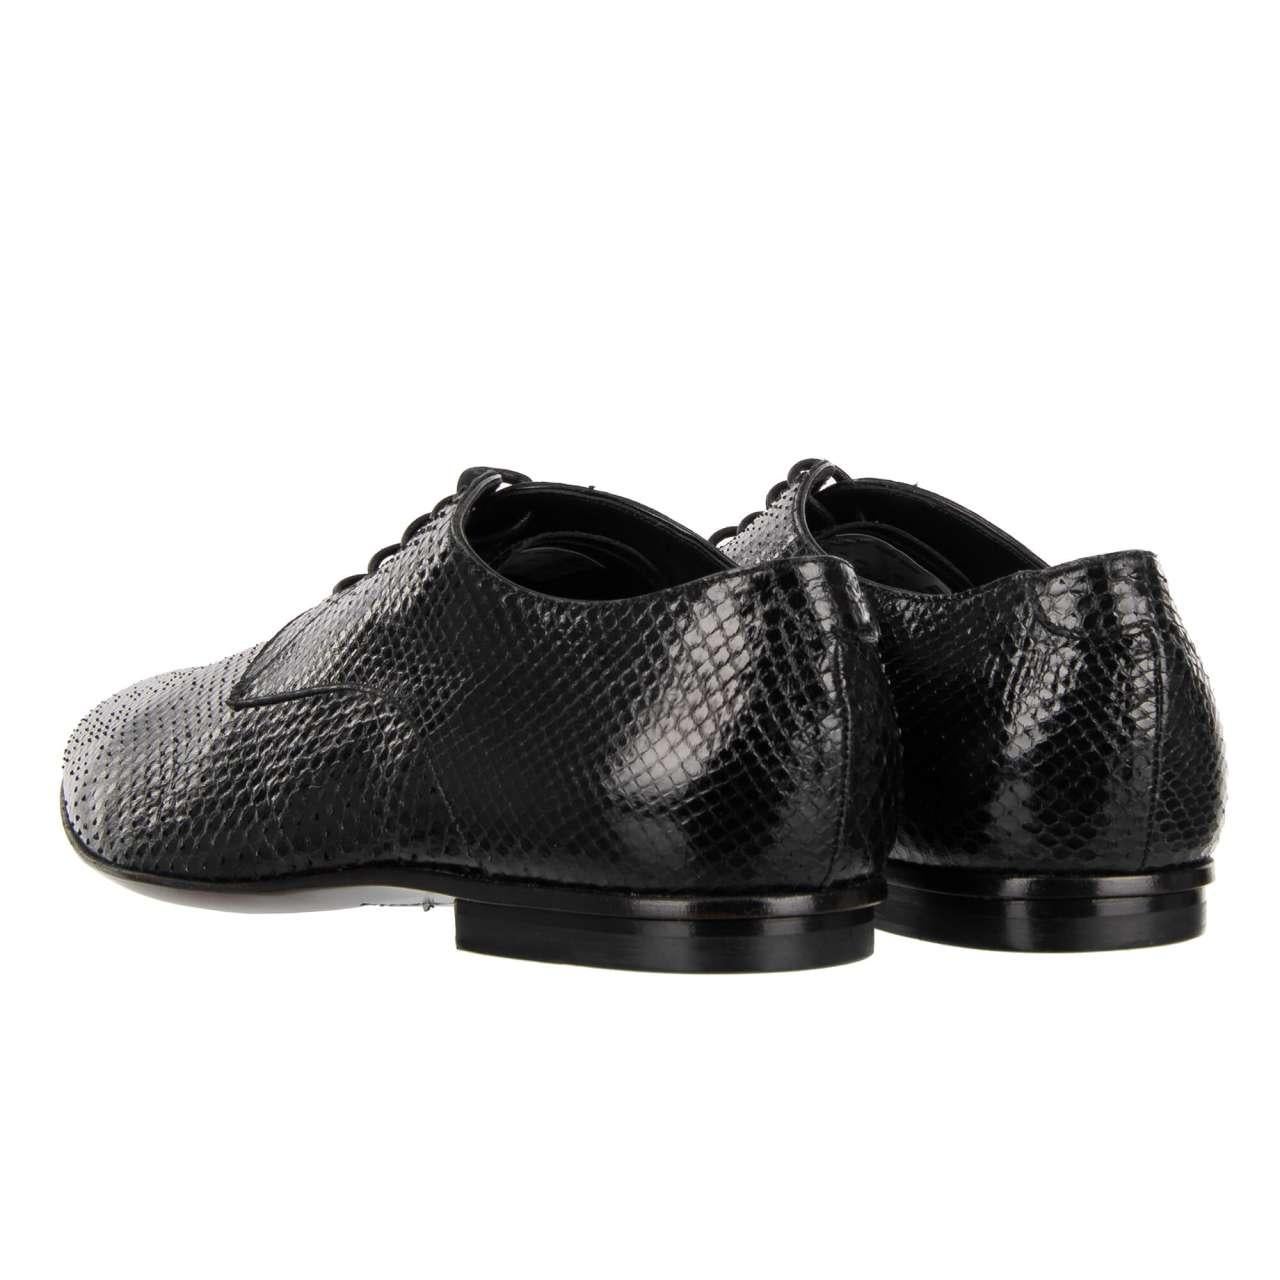 - Snake skin derby shoes OTELLO with lace in black by DOLCE & GABBANA - MADE IN ITALY - Former RRP: UR 1.250 - New with Box - Model: A10430-A2043-80999 - Material: 100% Snake skin - Sole: Leather - Color: Black - DG logo on the sole - Leather and